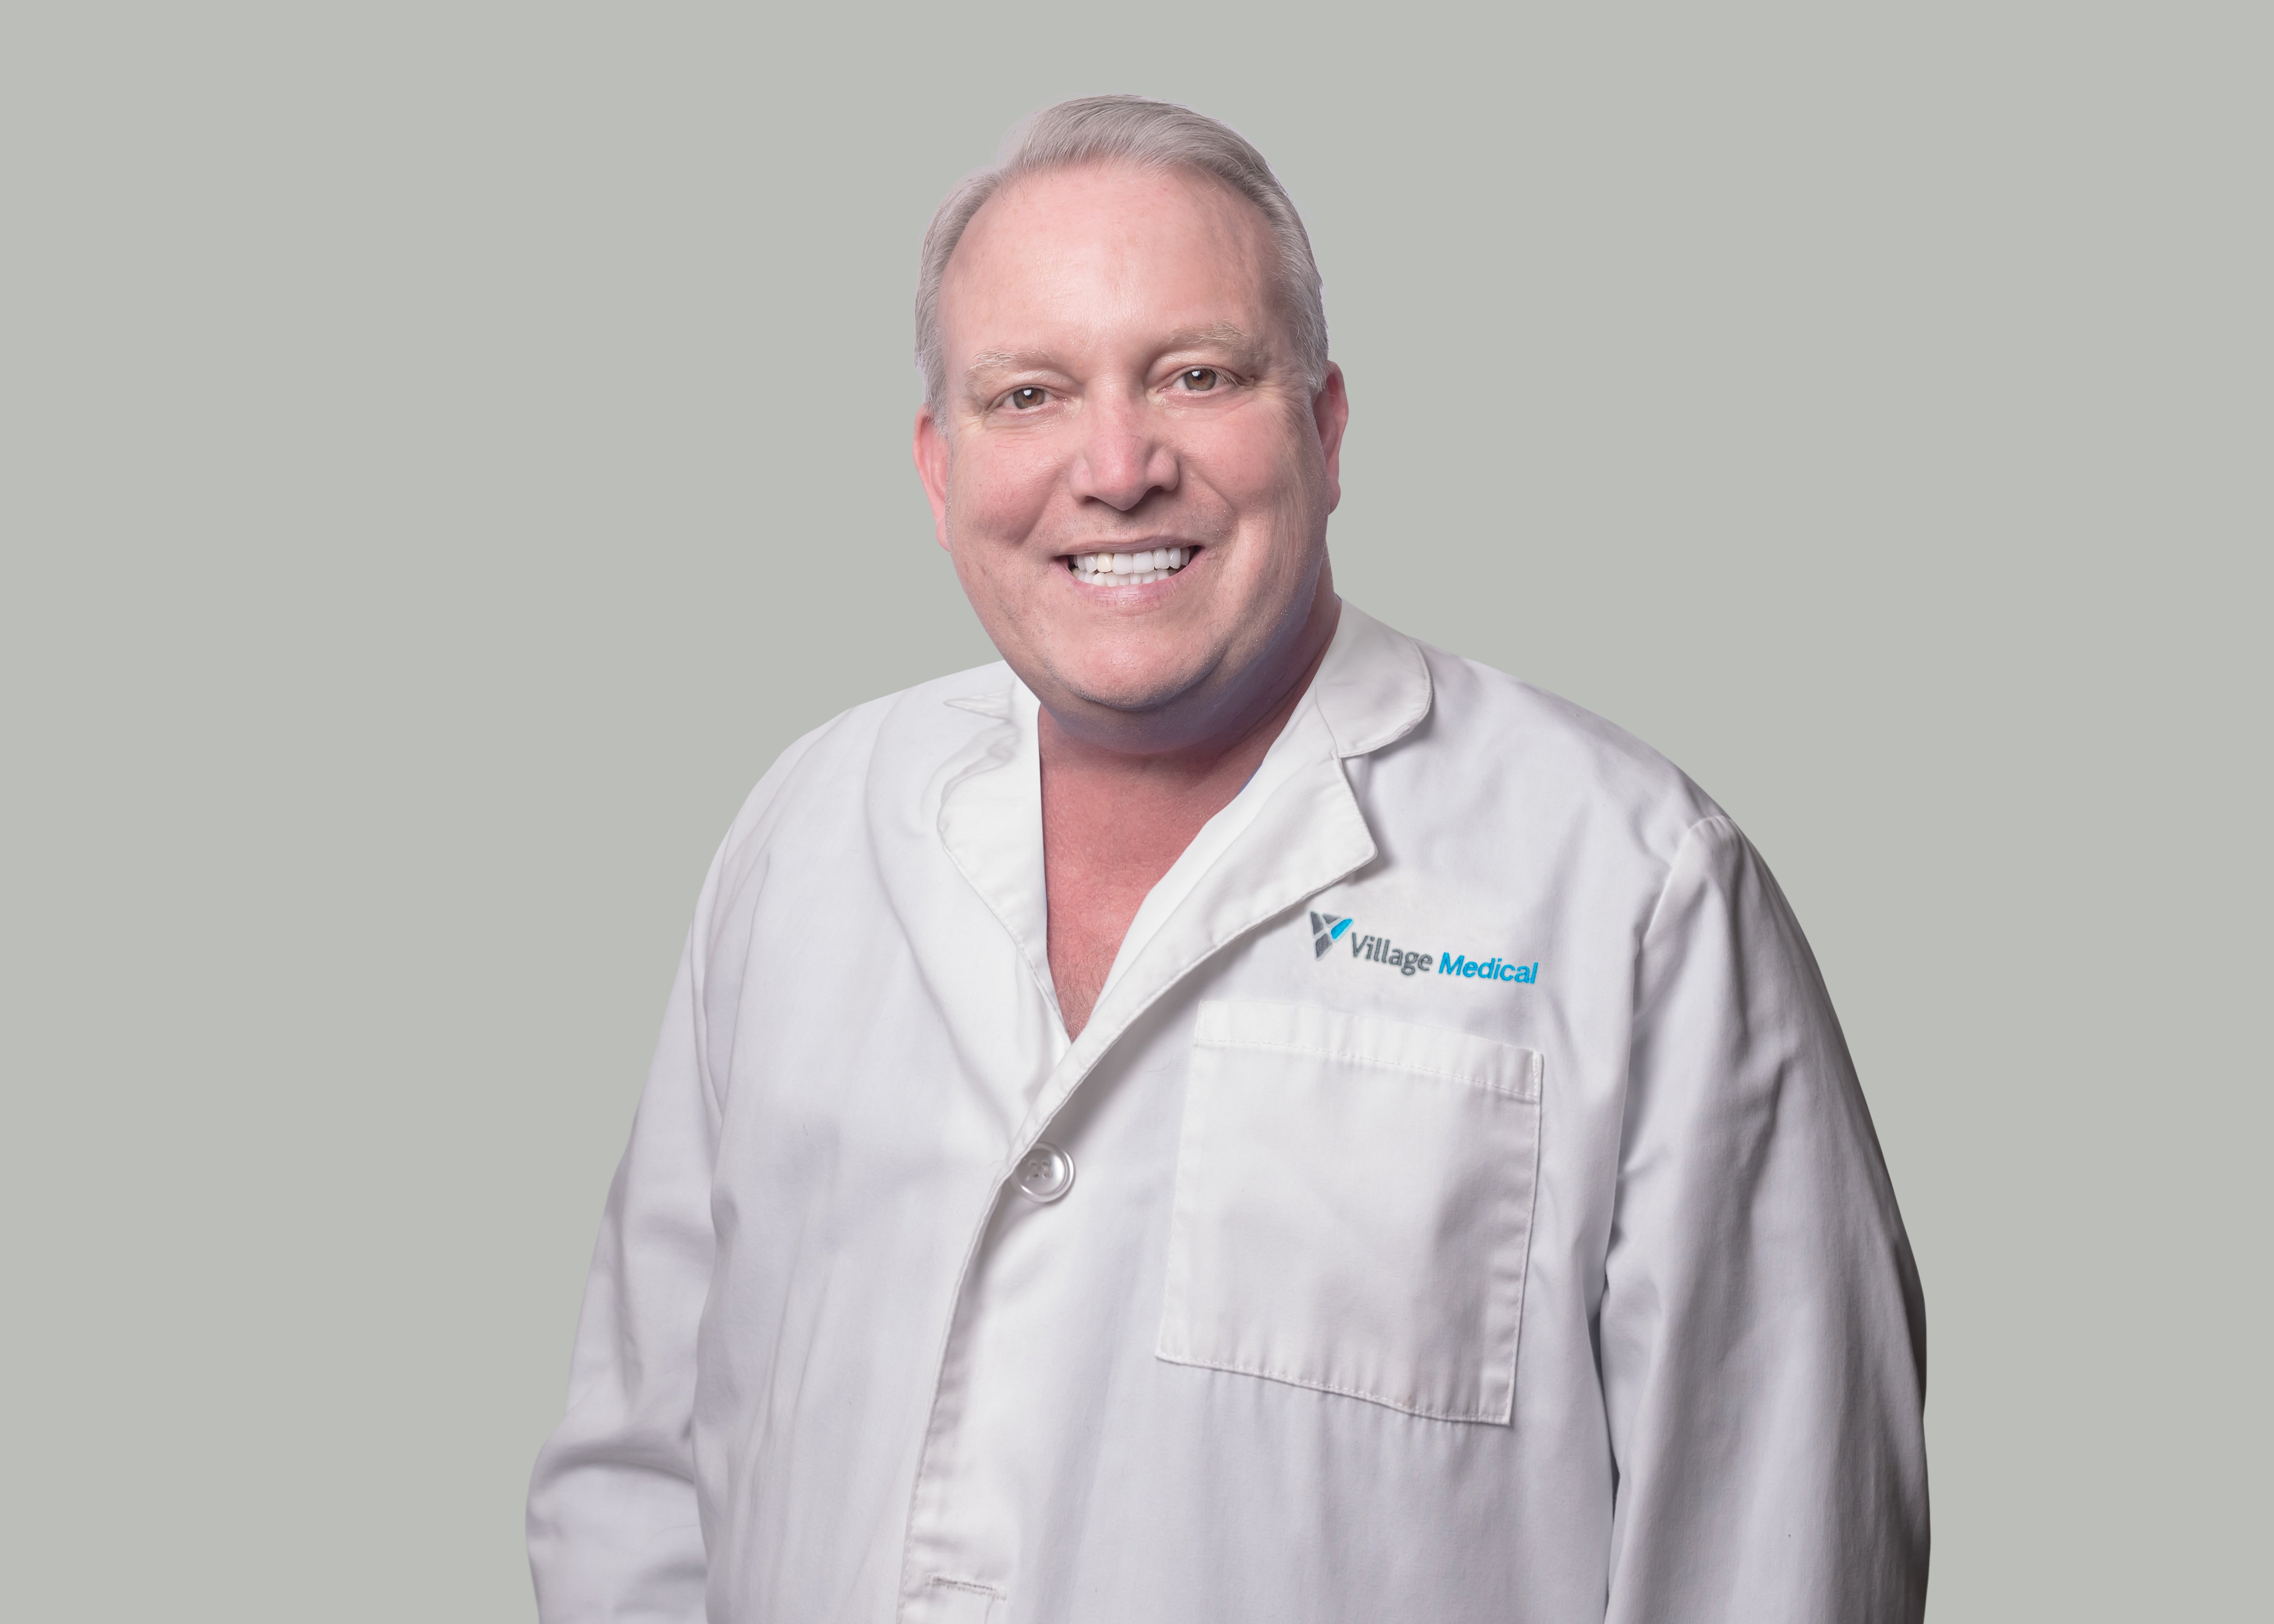 Professional headshot of Dave Gowman, MD